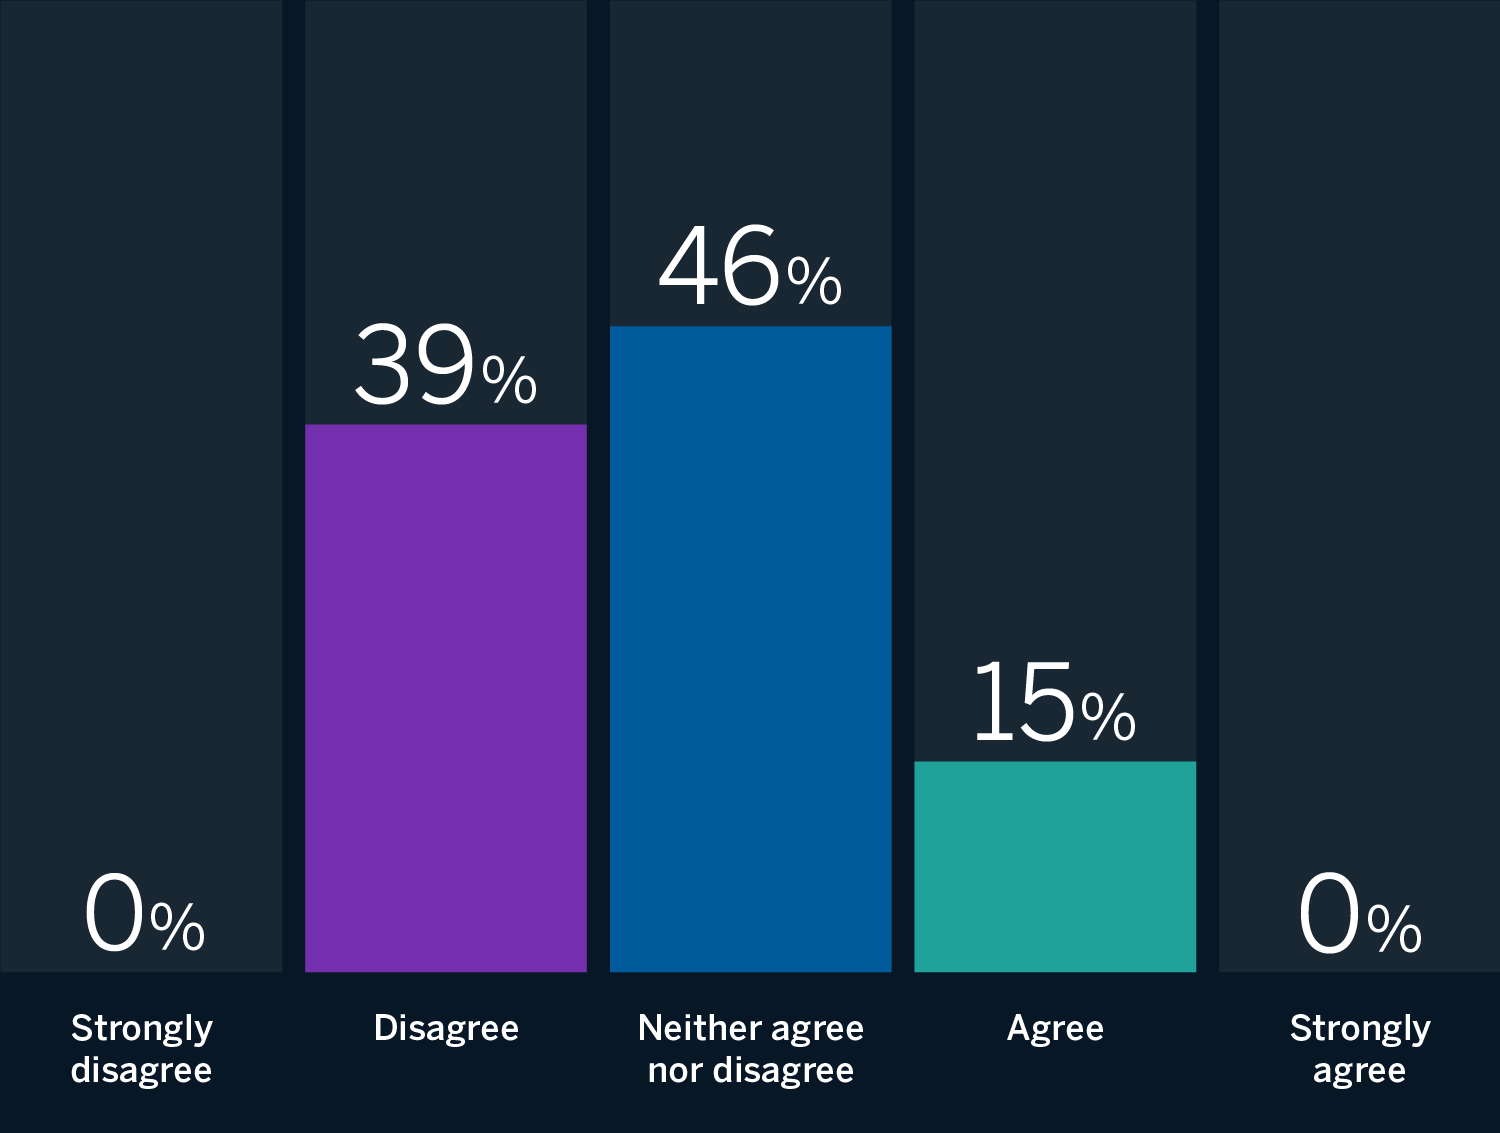 Chart: 0 strongly agree; 15% agree, 46% neither agree nor disagree; 39% disagree; 0% strongly disagree